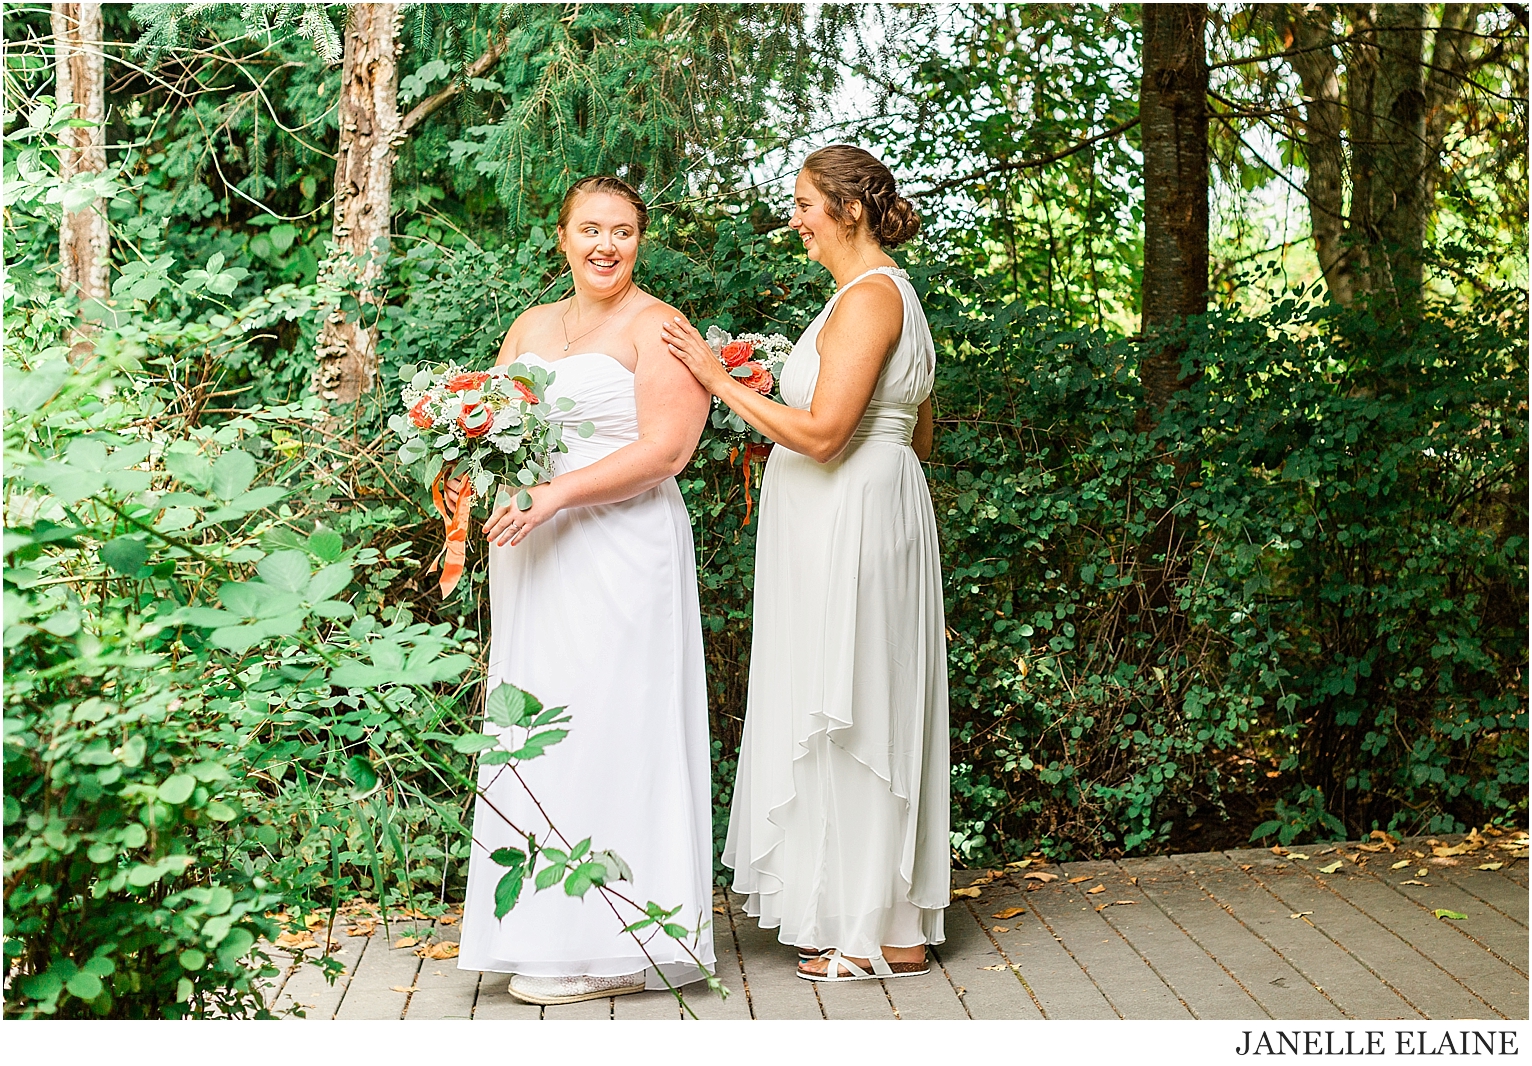 liz and christina lanning-first look and portraits-luther burbank park-janelle elaine photography-21.jpg